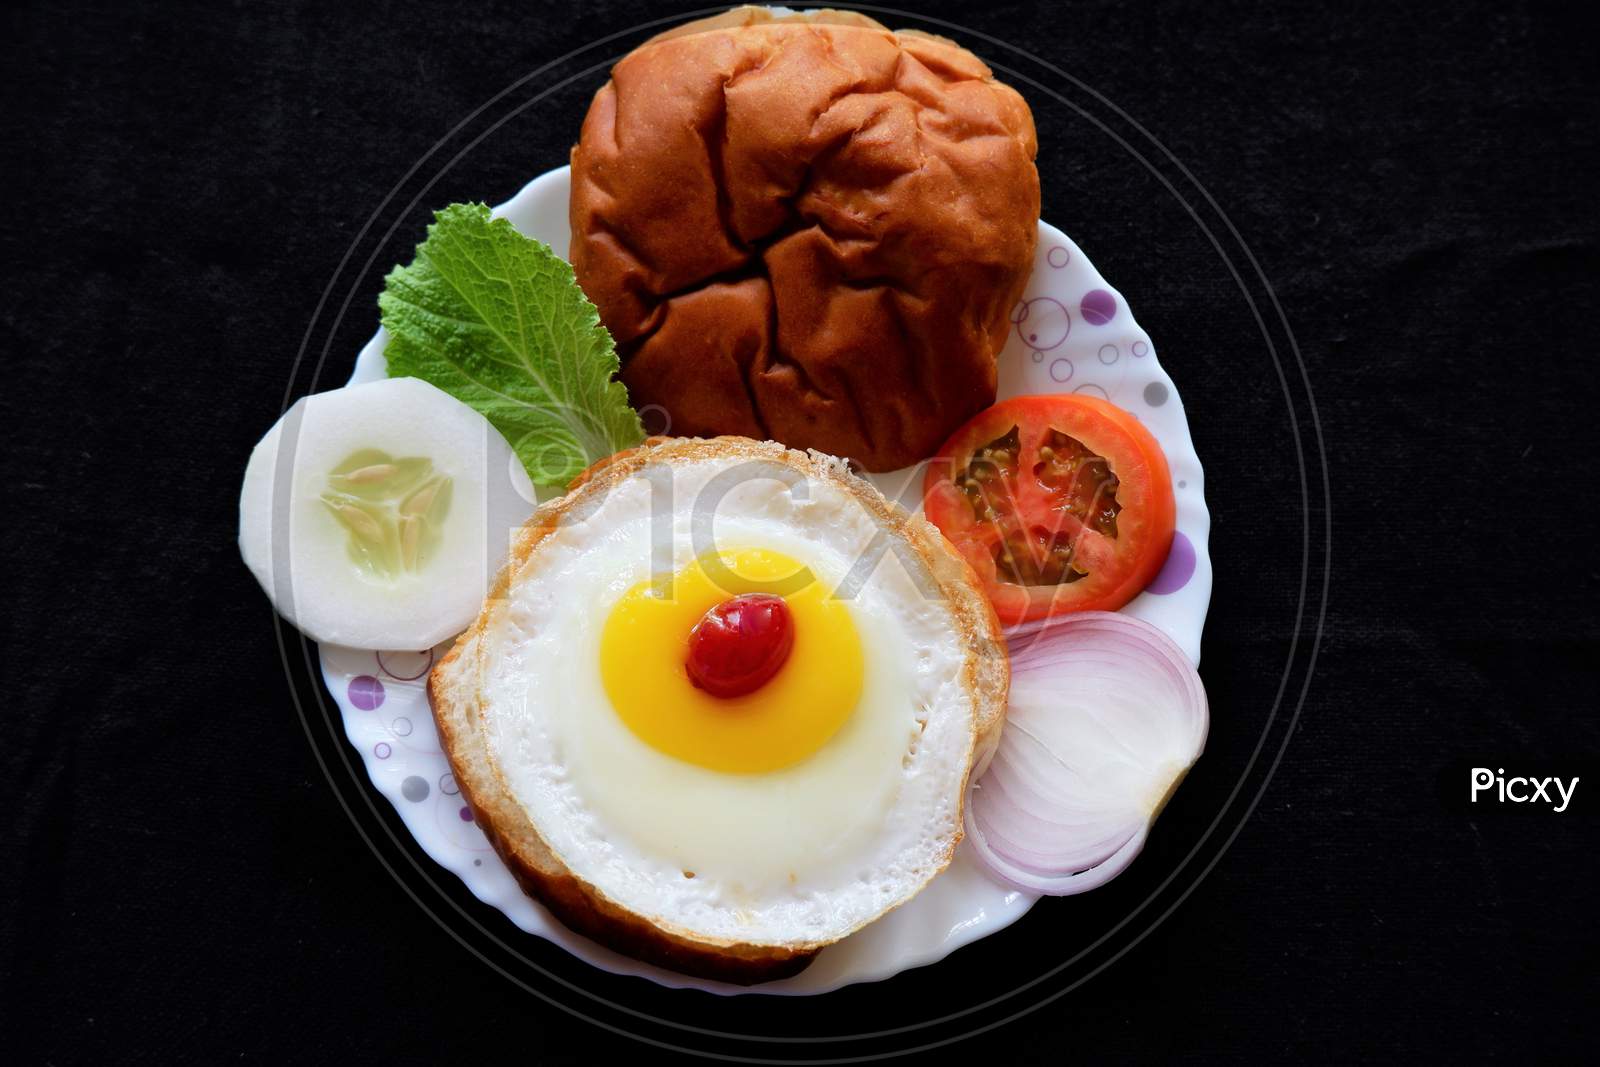 Homemade burger bun with fried egg and fresh vegetables on a white plate . Top view image.